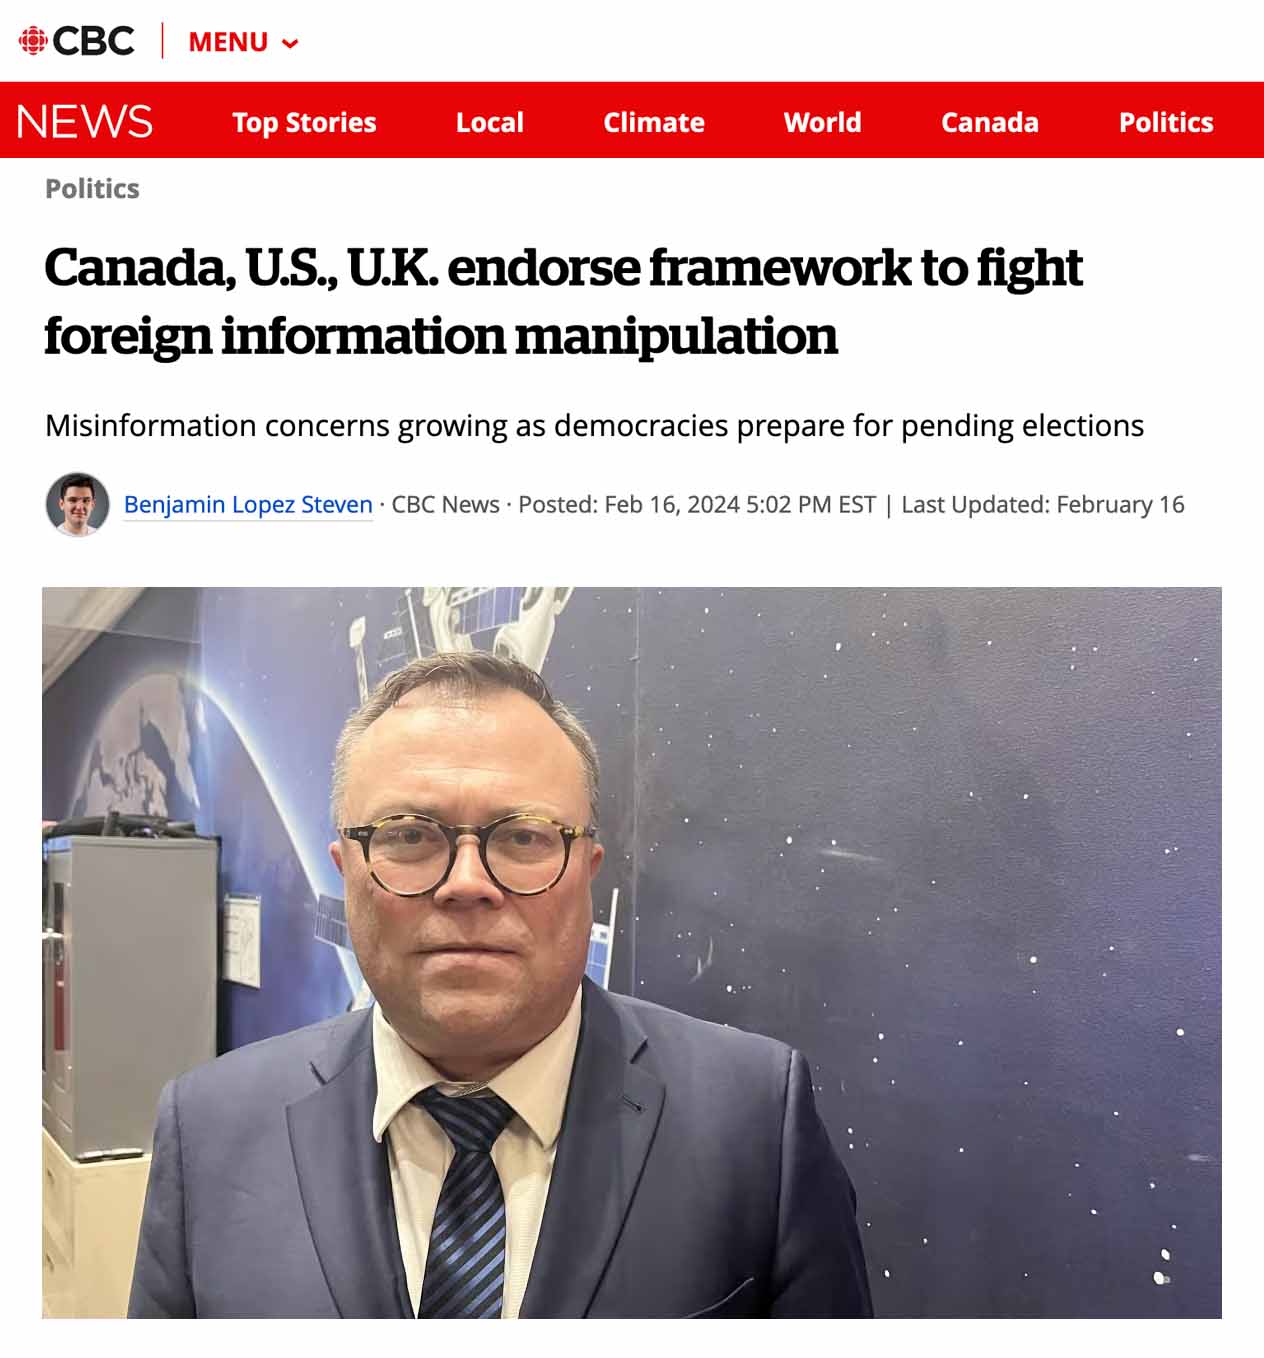 DisinfoWatch Quoted in CBC Article About Canada-US-UK FIMI Framework